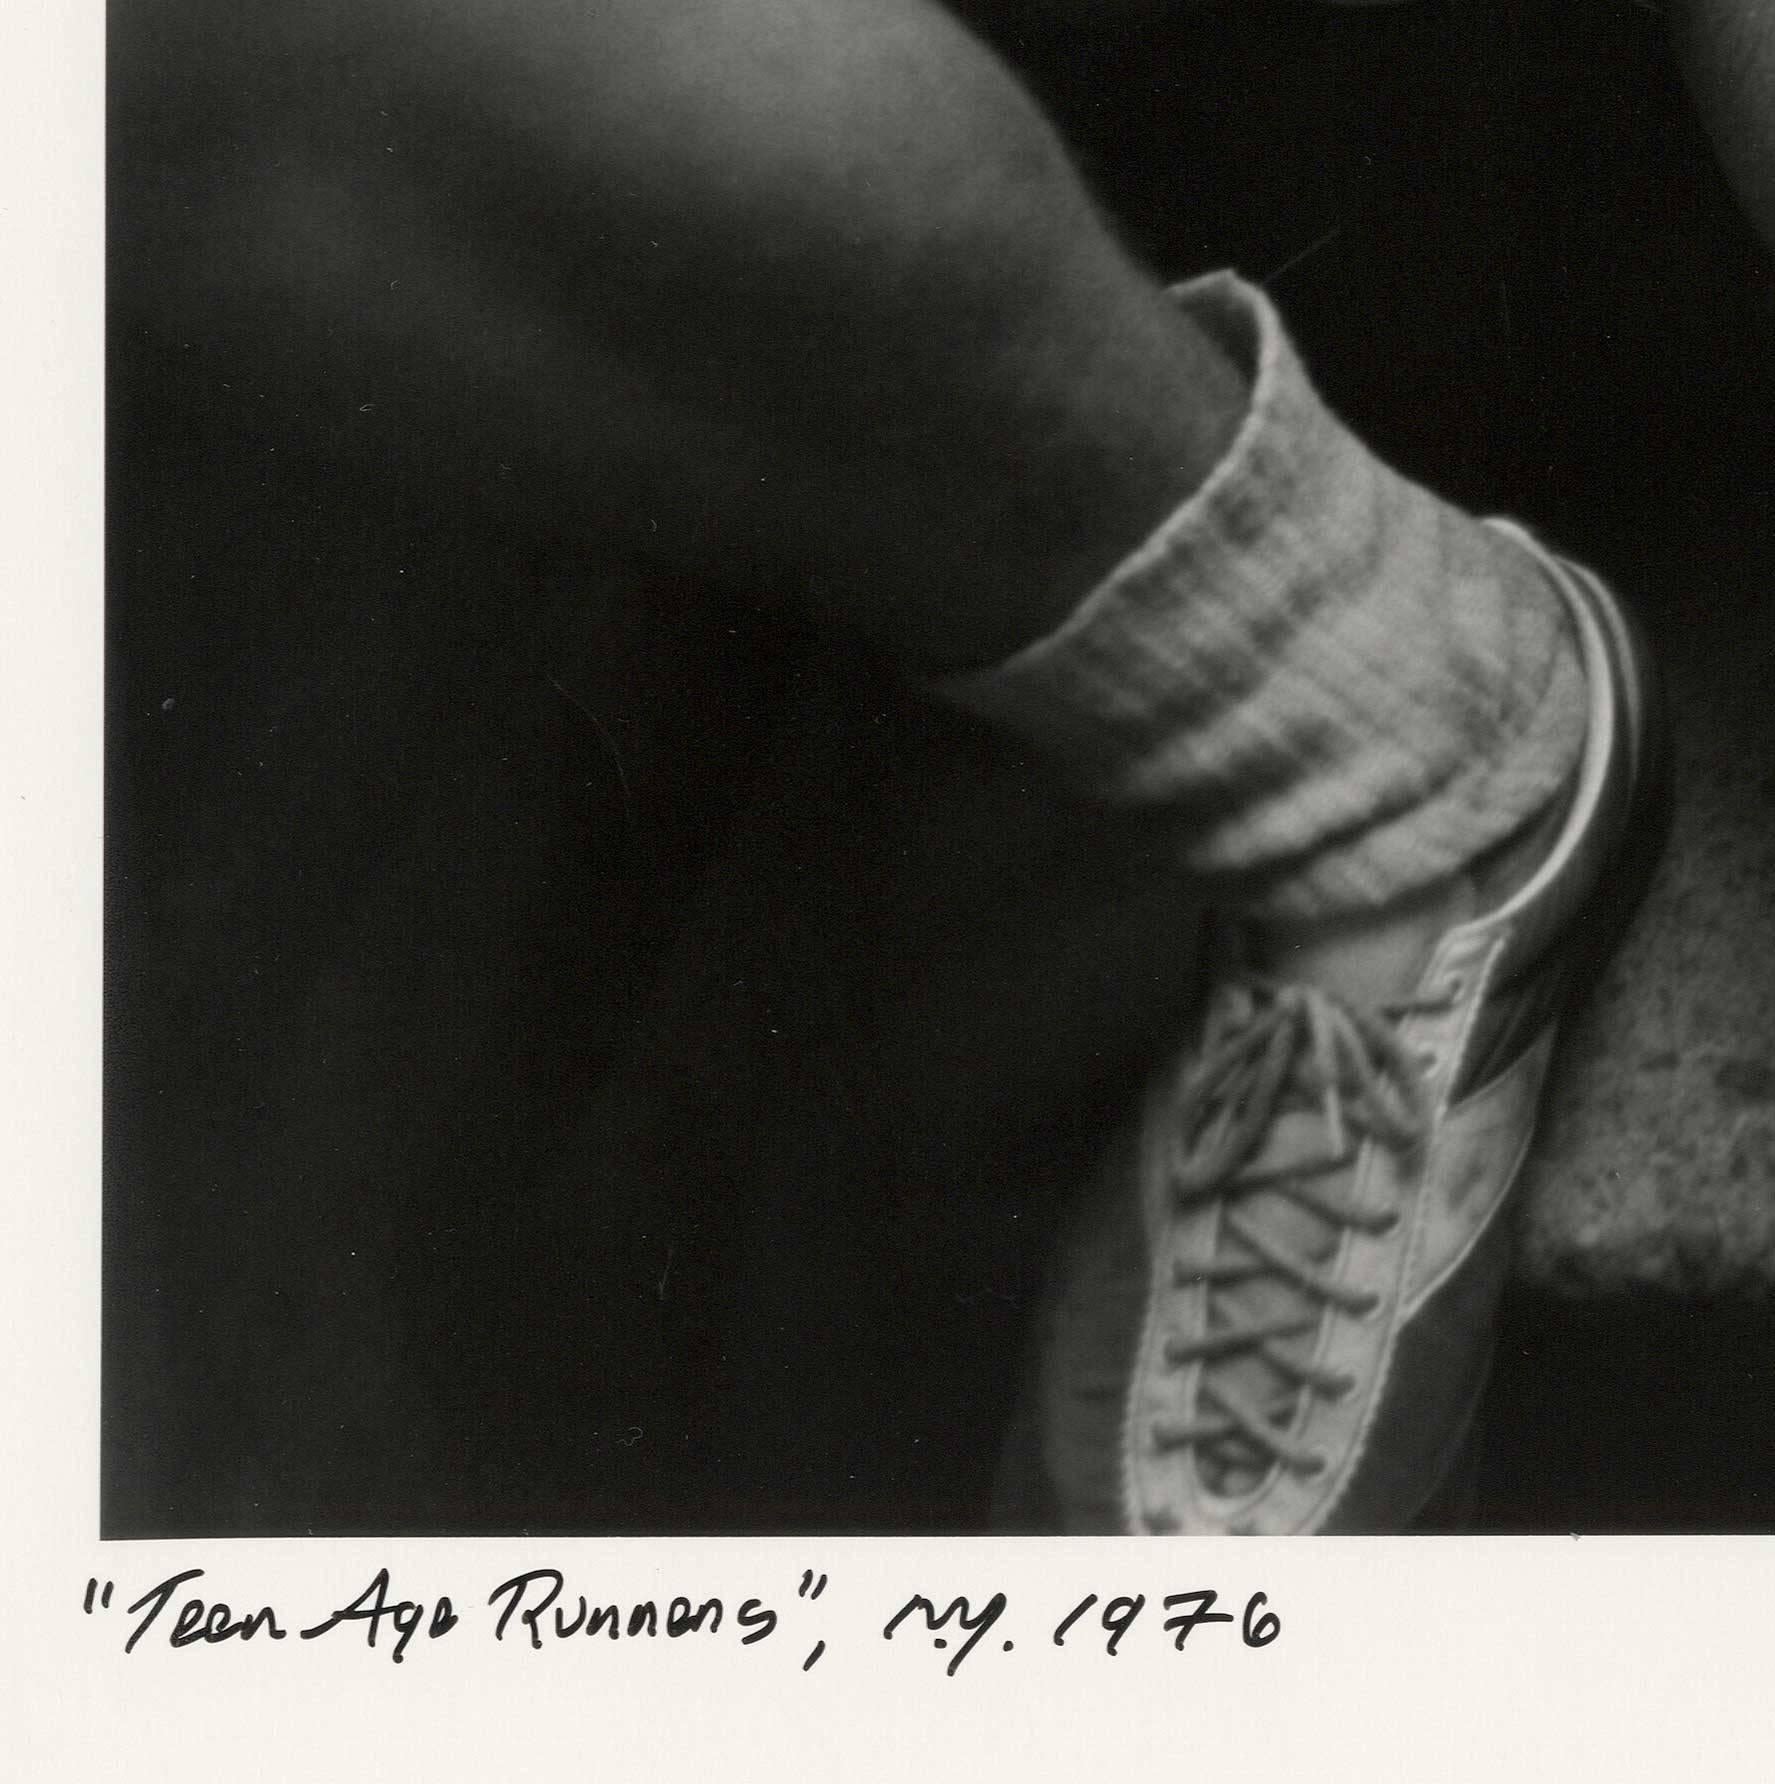 Teenage Runners (two innocent young boys in intimate moment on a New York stoop) - Photograph by Arthur Tress